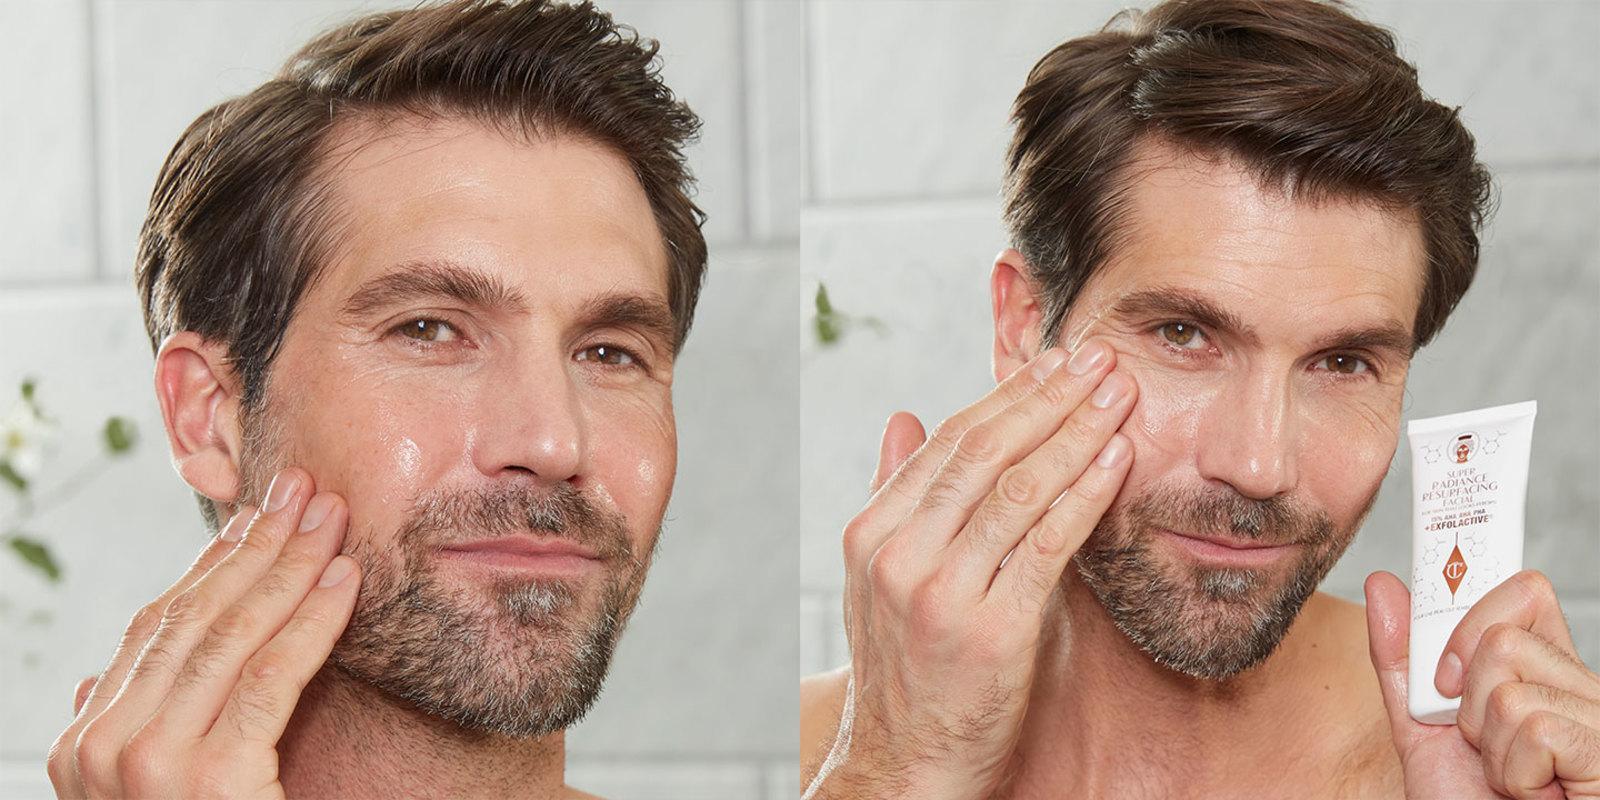 A fair-tone male model with mature, smooth, and glowing skin applying skincare products.